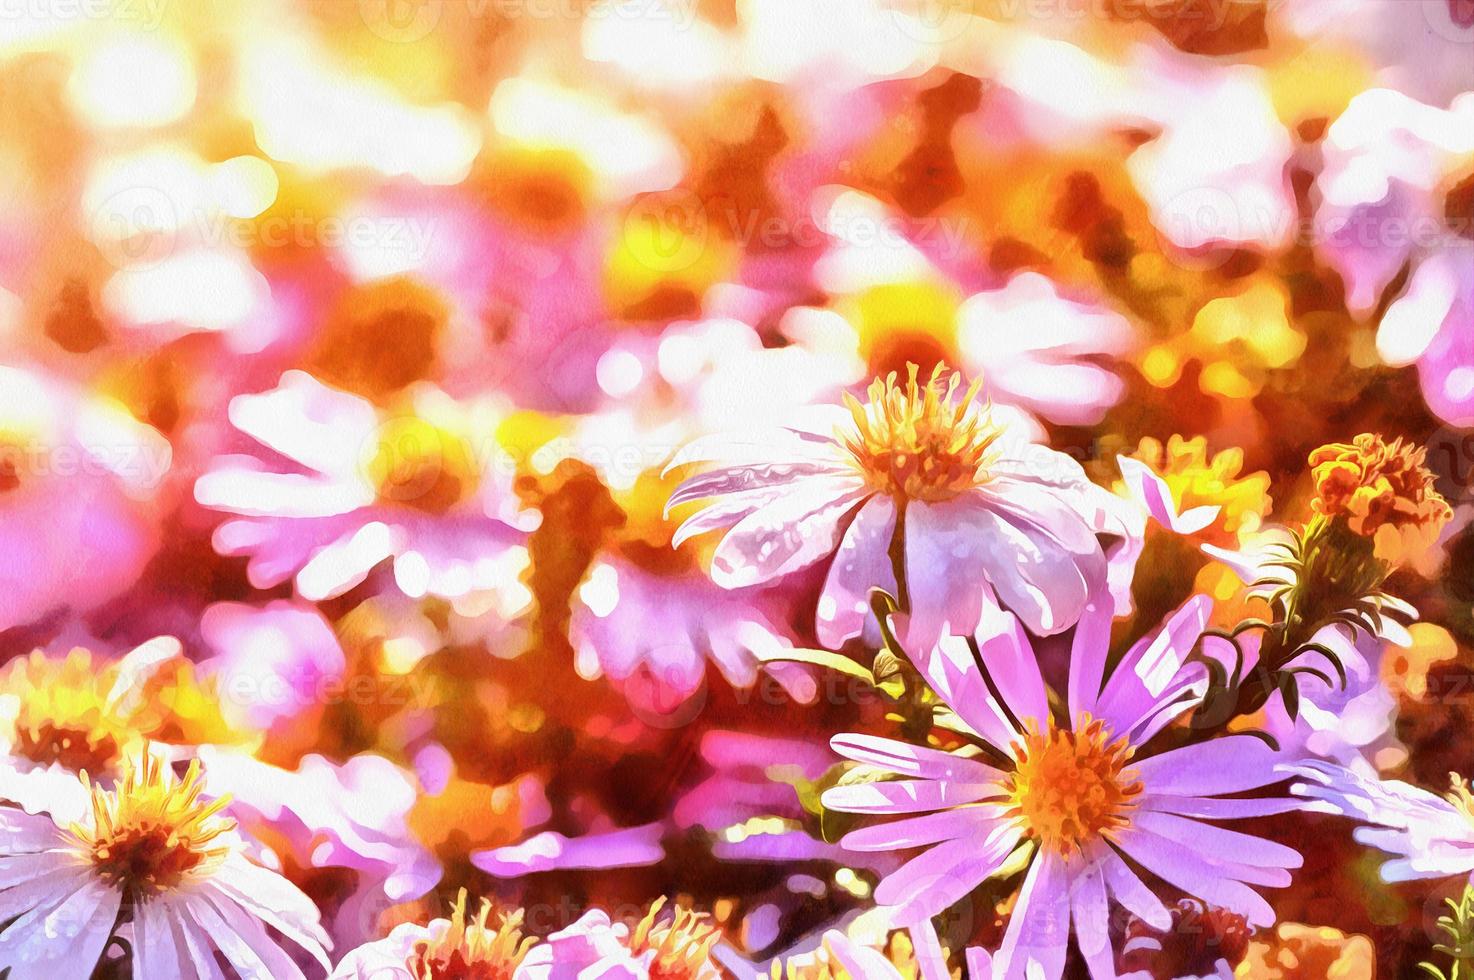 purple daisy. The works in the style of watercolor painting photo